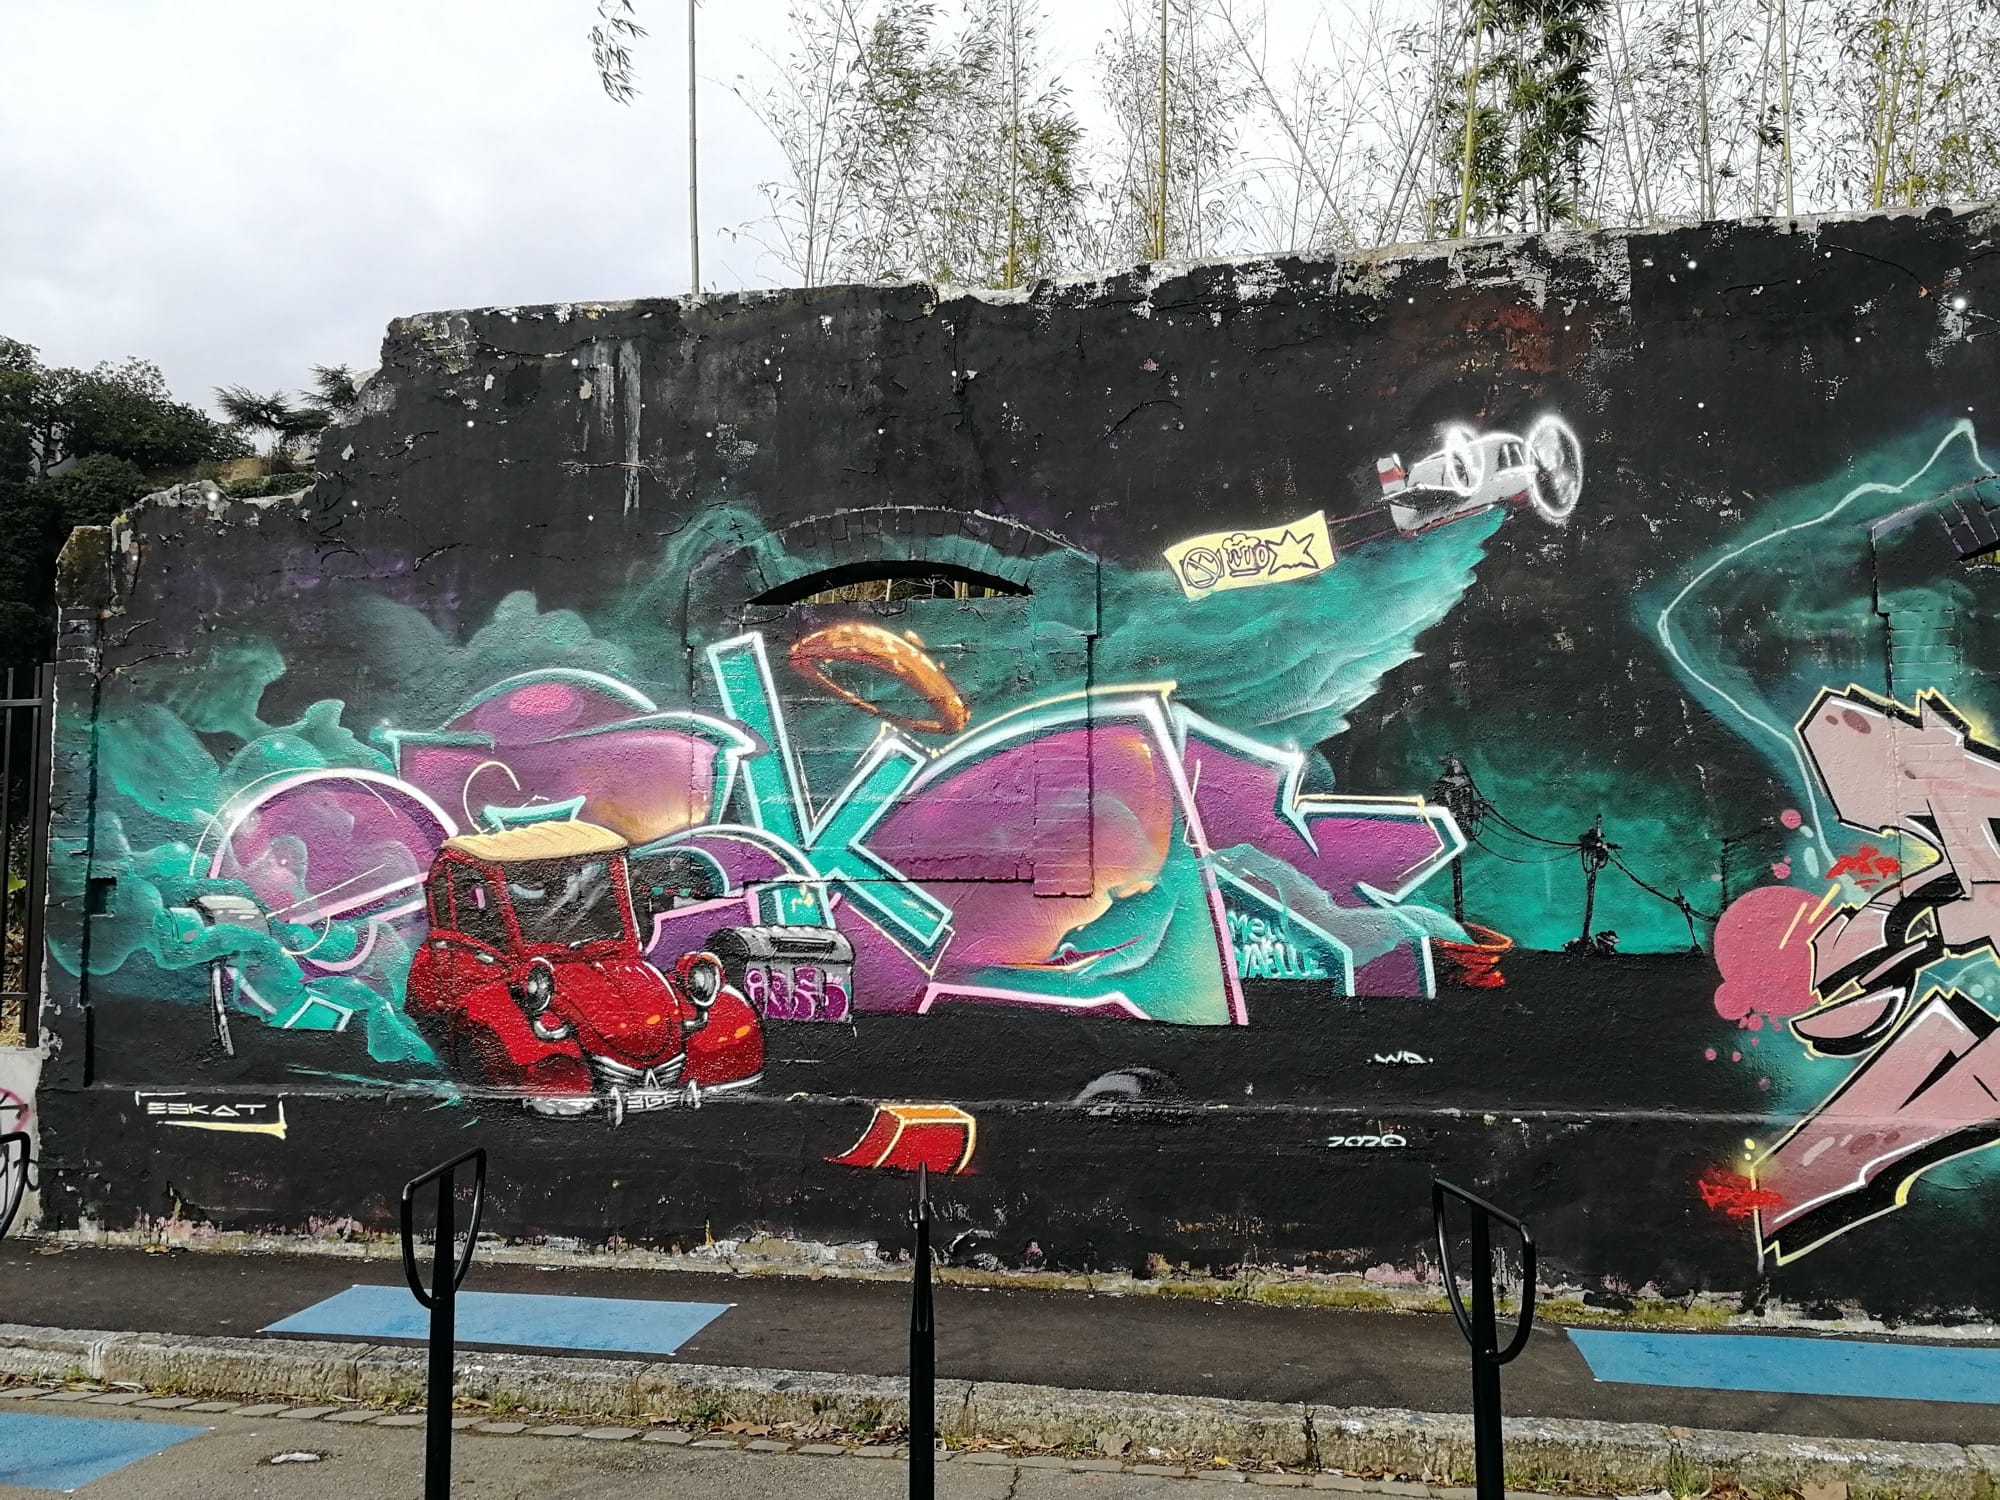 Graffiti 4026  captured by Rabot in Nantes France